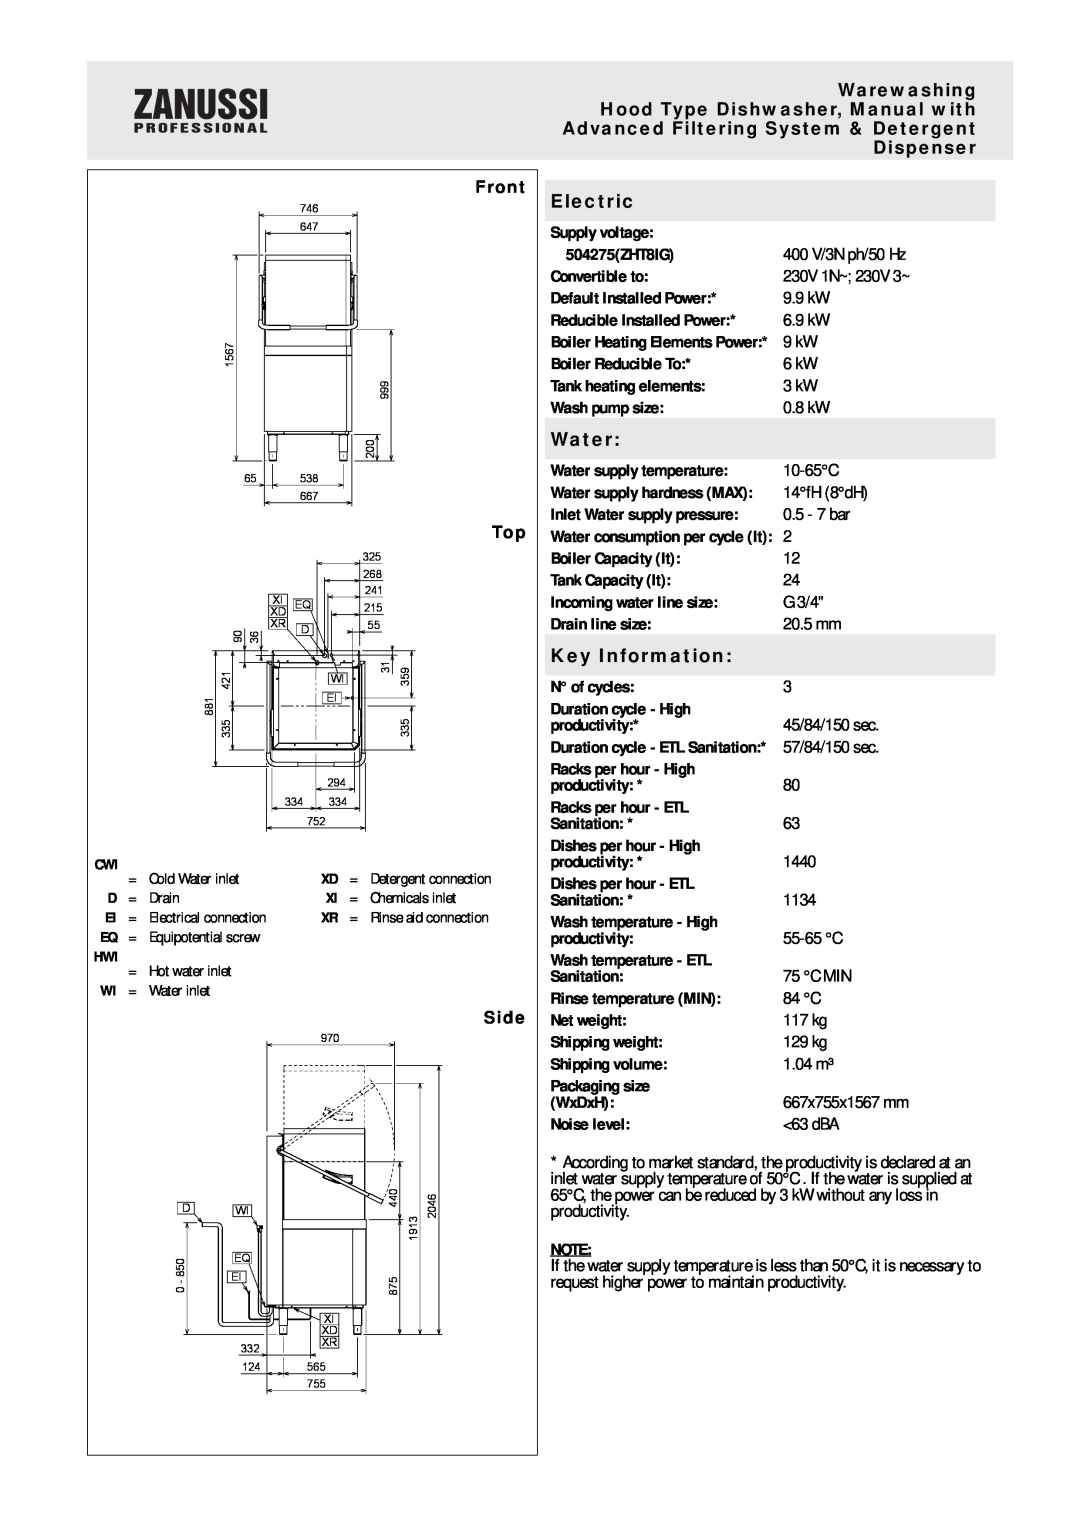 Electrolux ZHT8IG manual Front, Side, Electric, Water, Key Information 